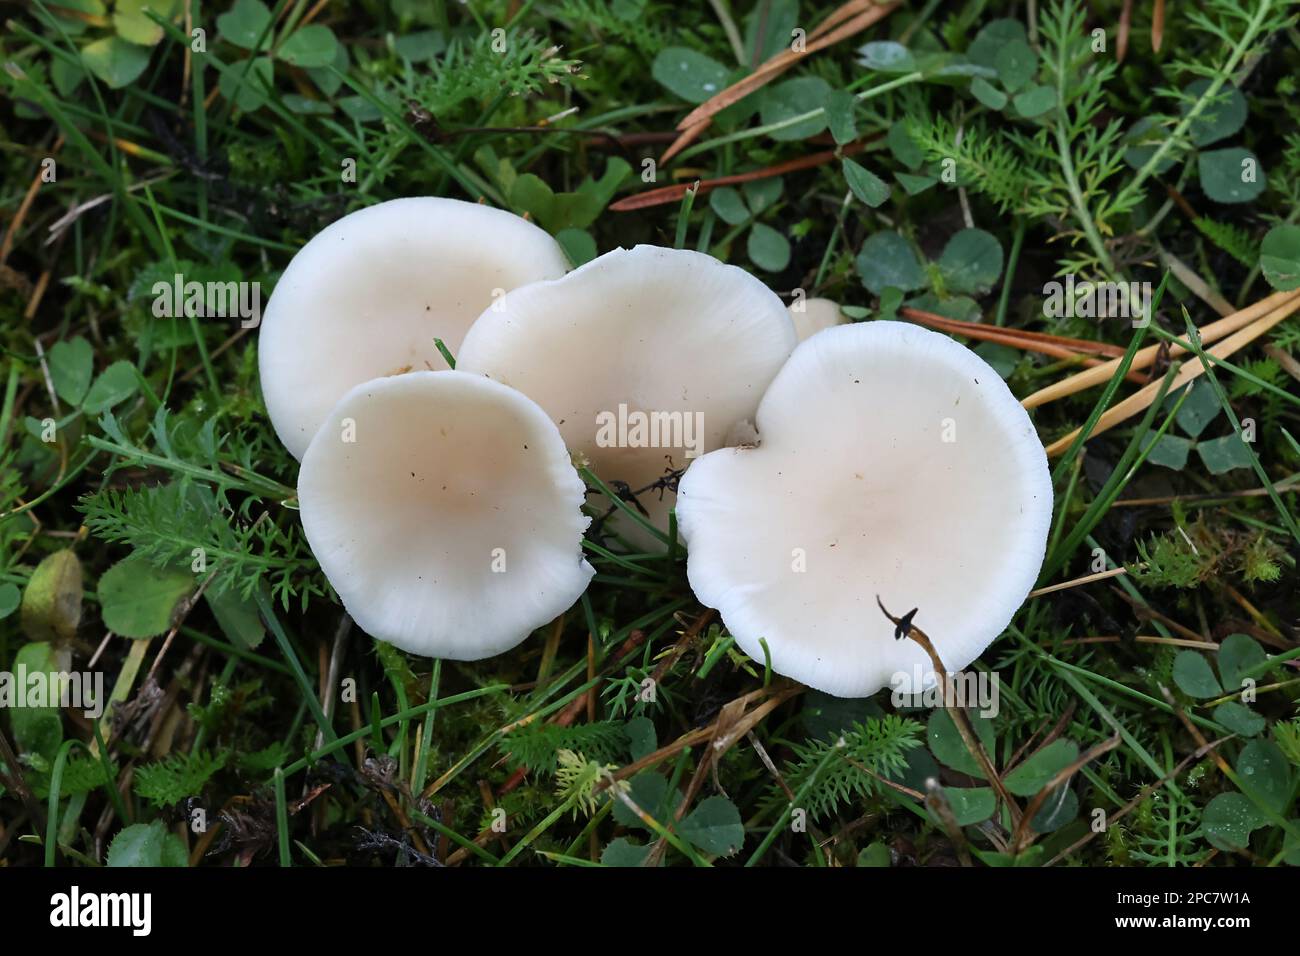 Clitocybe agrestis, commonly known as meadow funnel, wild mushroom from Finland Stock Photo